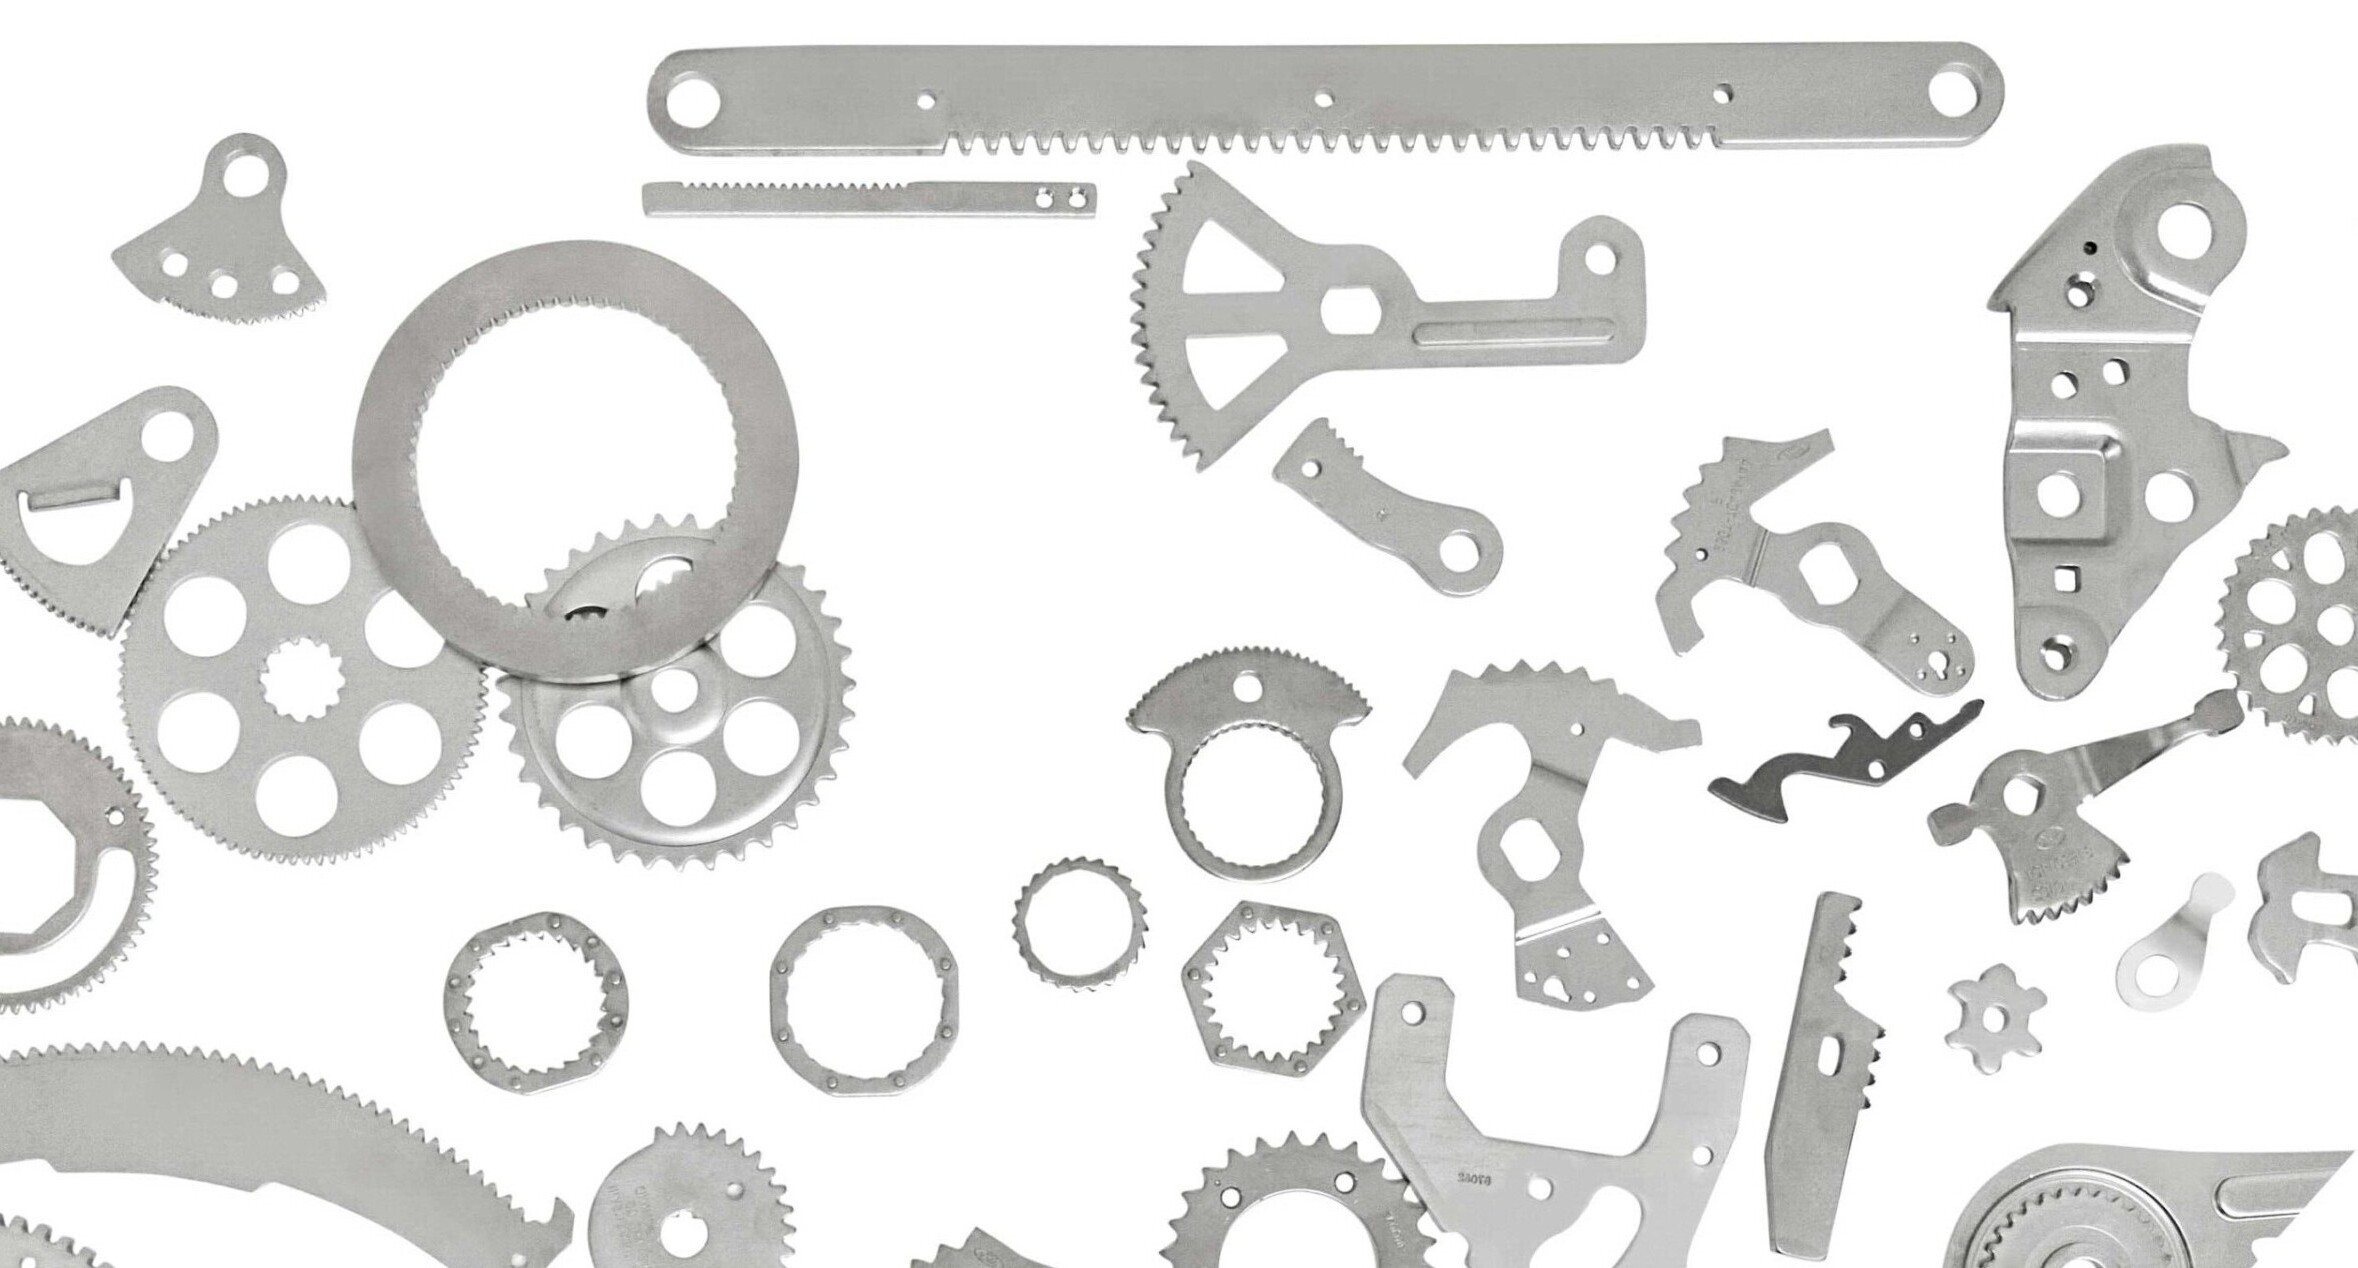 Fine-blanked parts are produced in an almost countless diversity of shapes for a huge variety of uses.